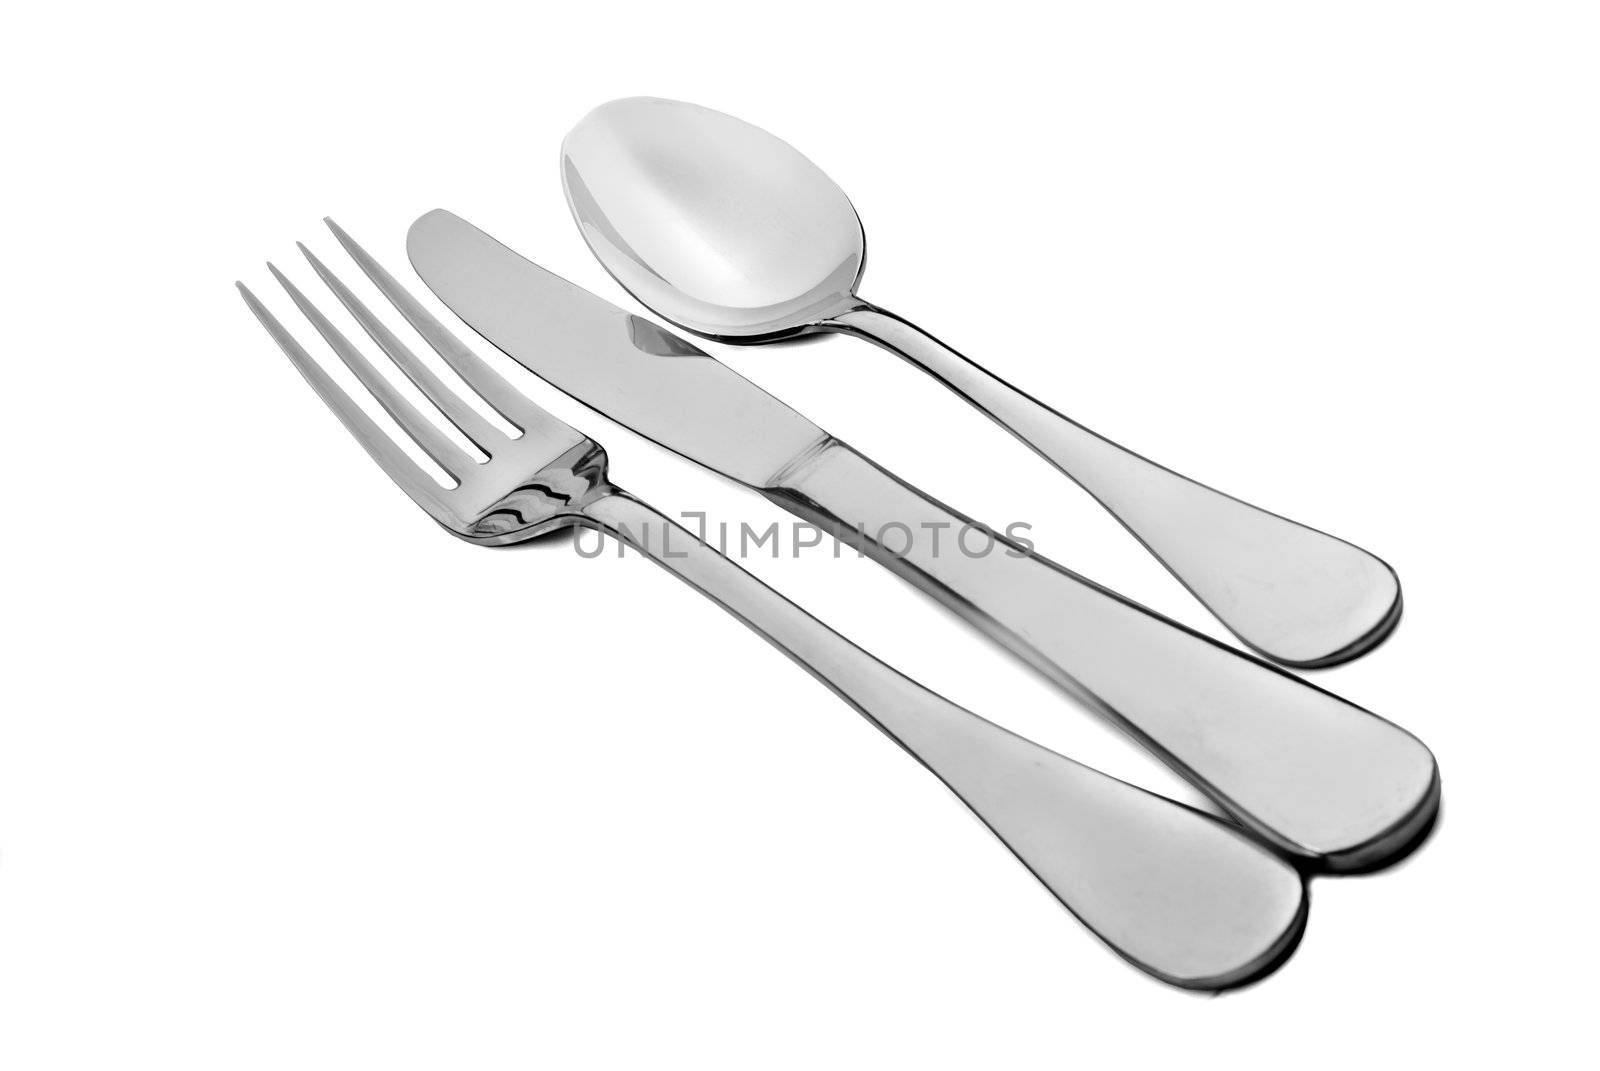 Cutlery - fork knife and spoon on white